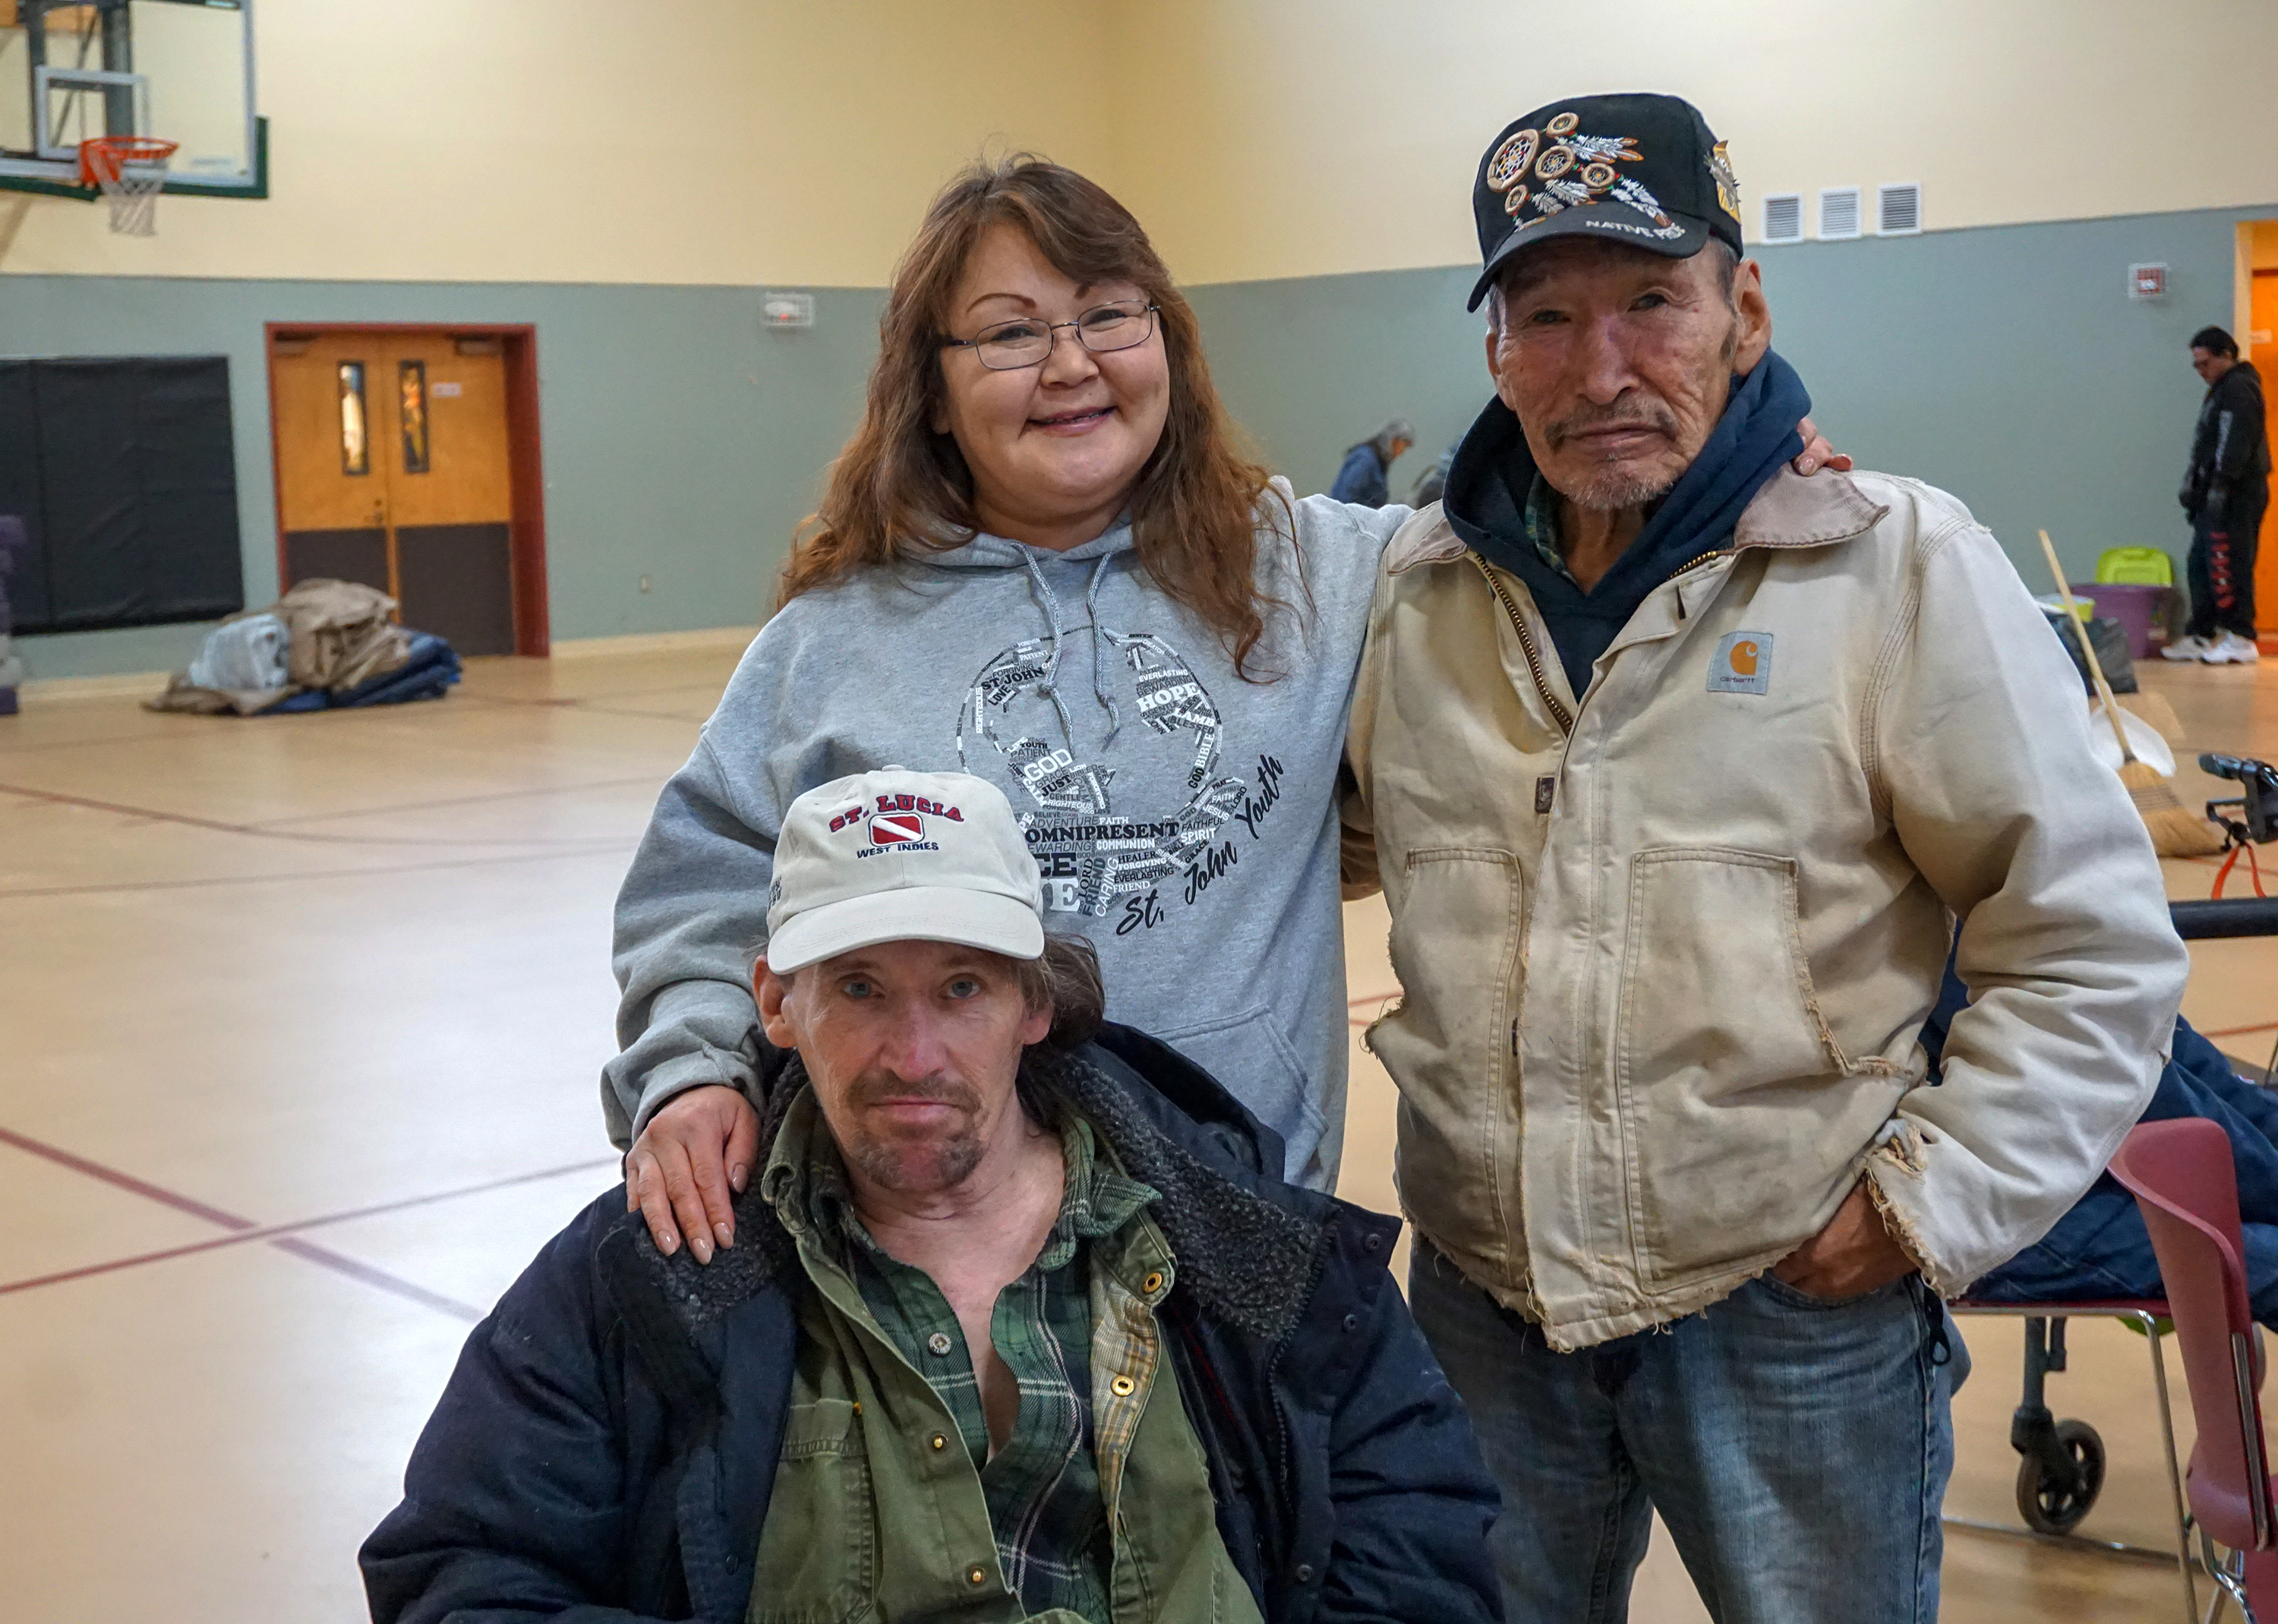 Betty Sanchez Sopcak (l), her husband Daniel (bottom), and her uncle James Sugar (r) take shelter with other residents of Karluk Manor at St. John United Methodist Church after the Nov. 30 earthquake. Photo by Anne Hillman, courtesy of Alaska Public Media.